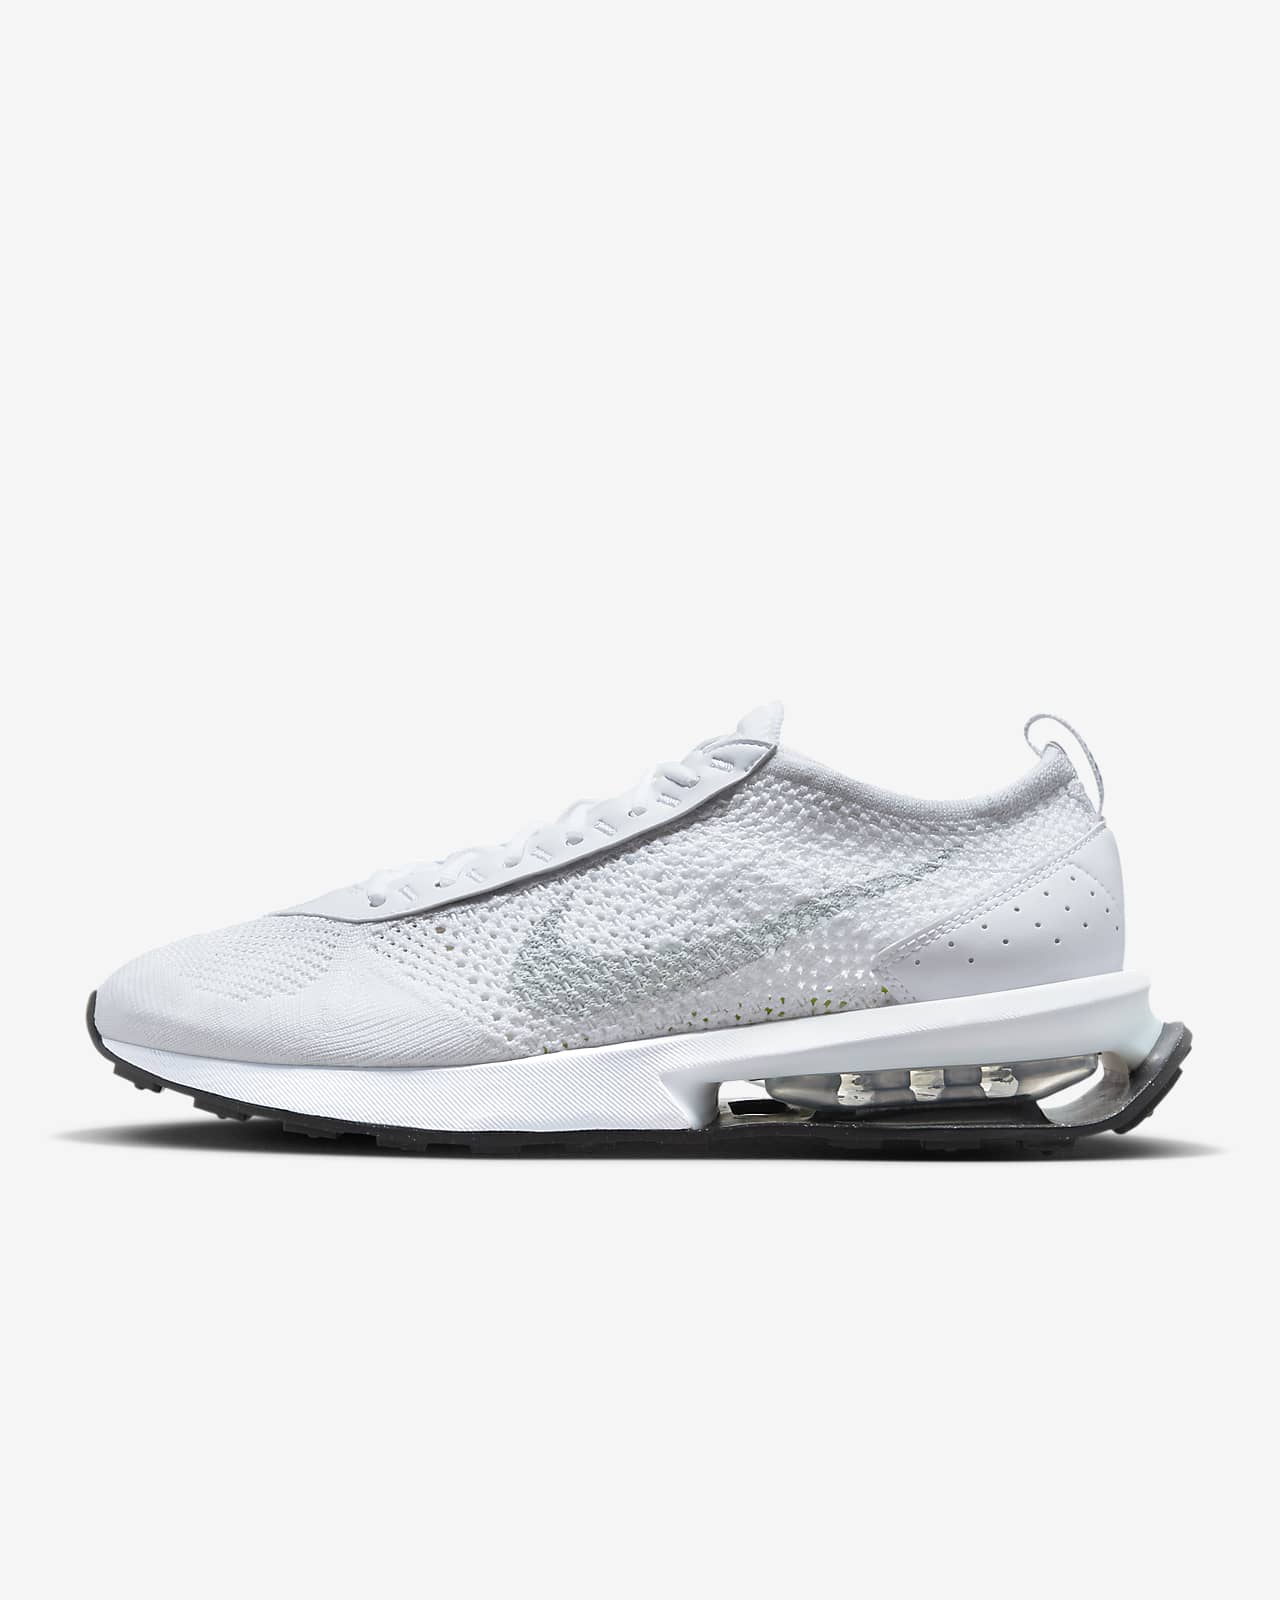 nul Peregrination hobby Nike Air Max Flyknit Racer Next Nature Men's Shoes. Nike.com